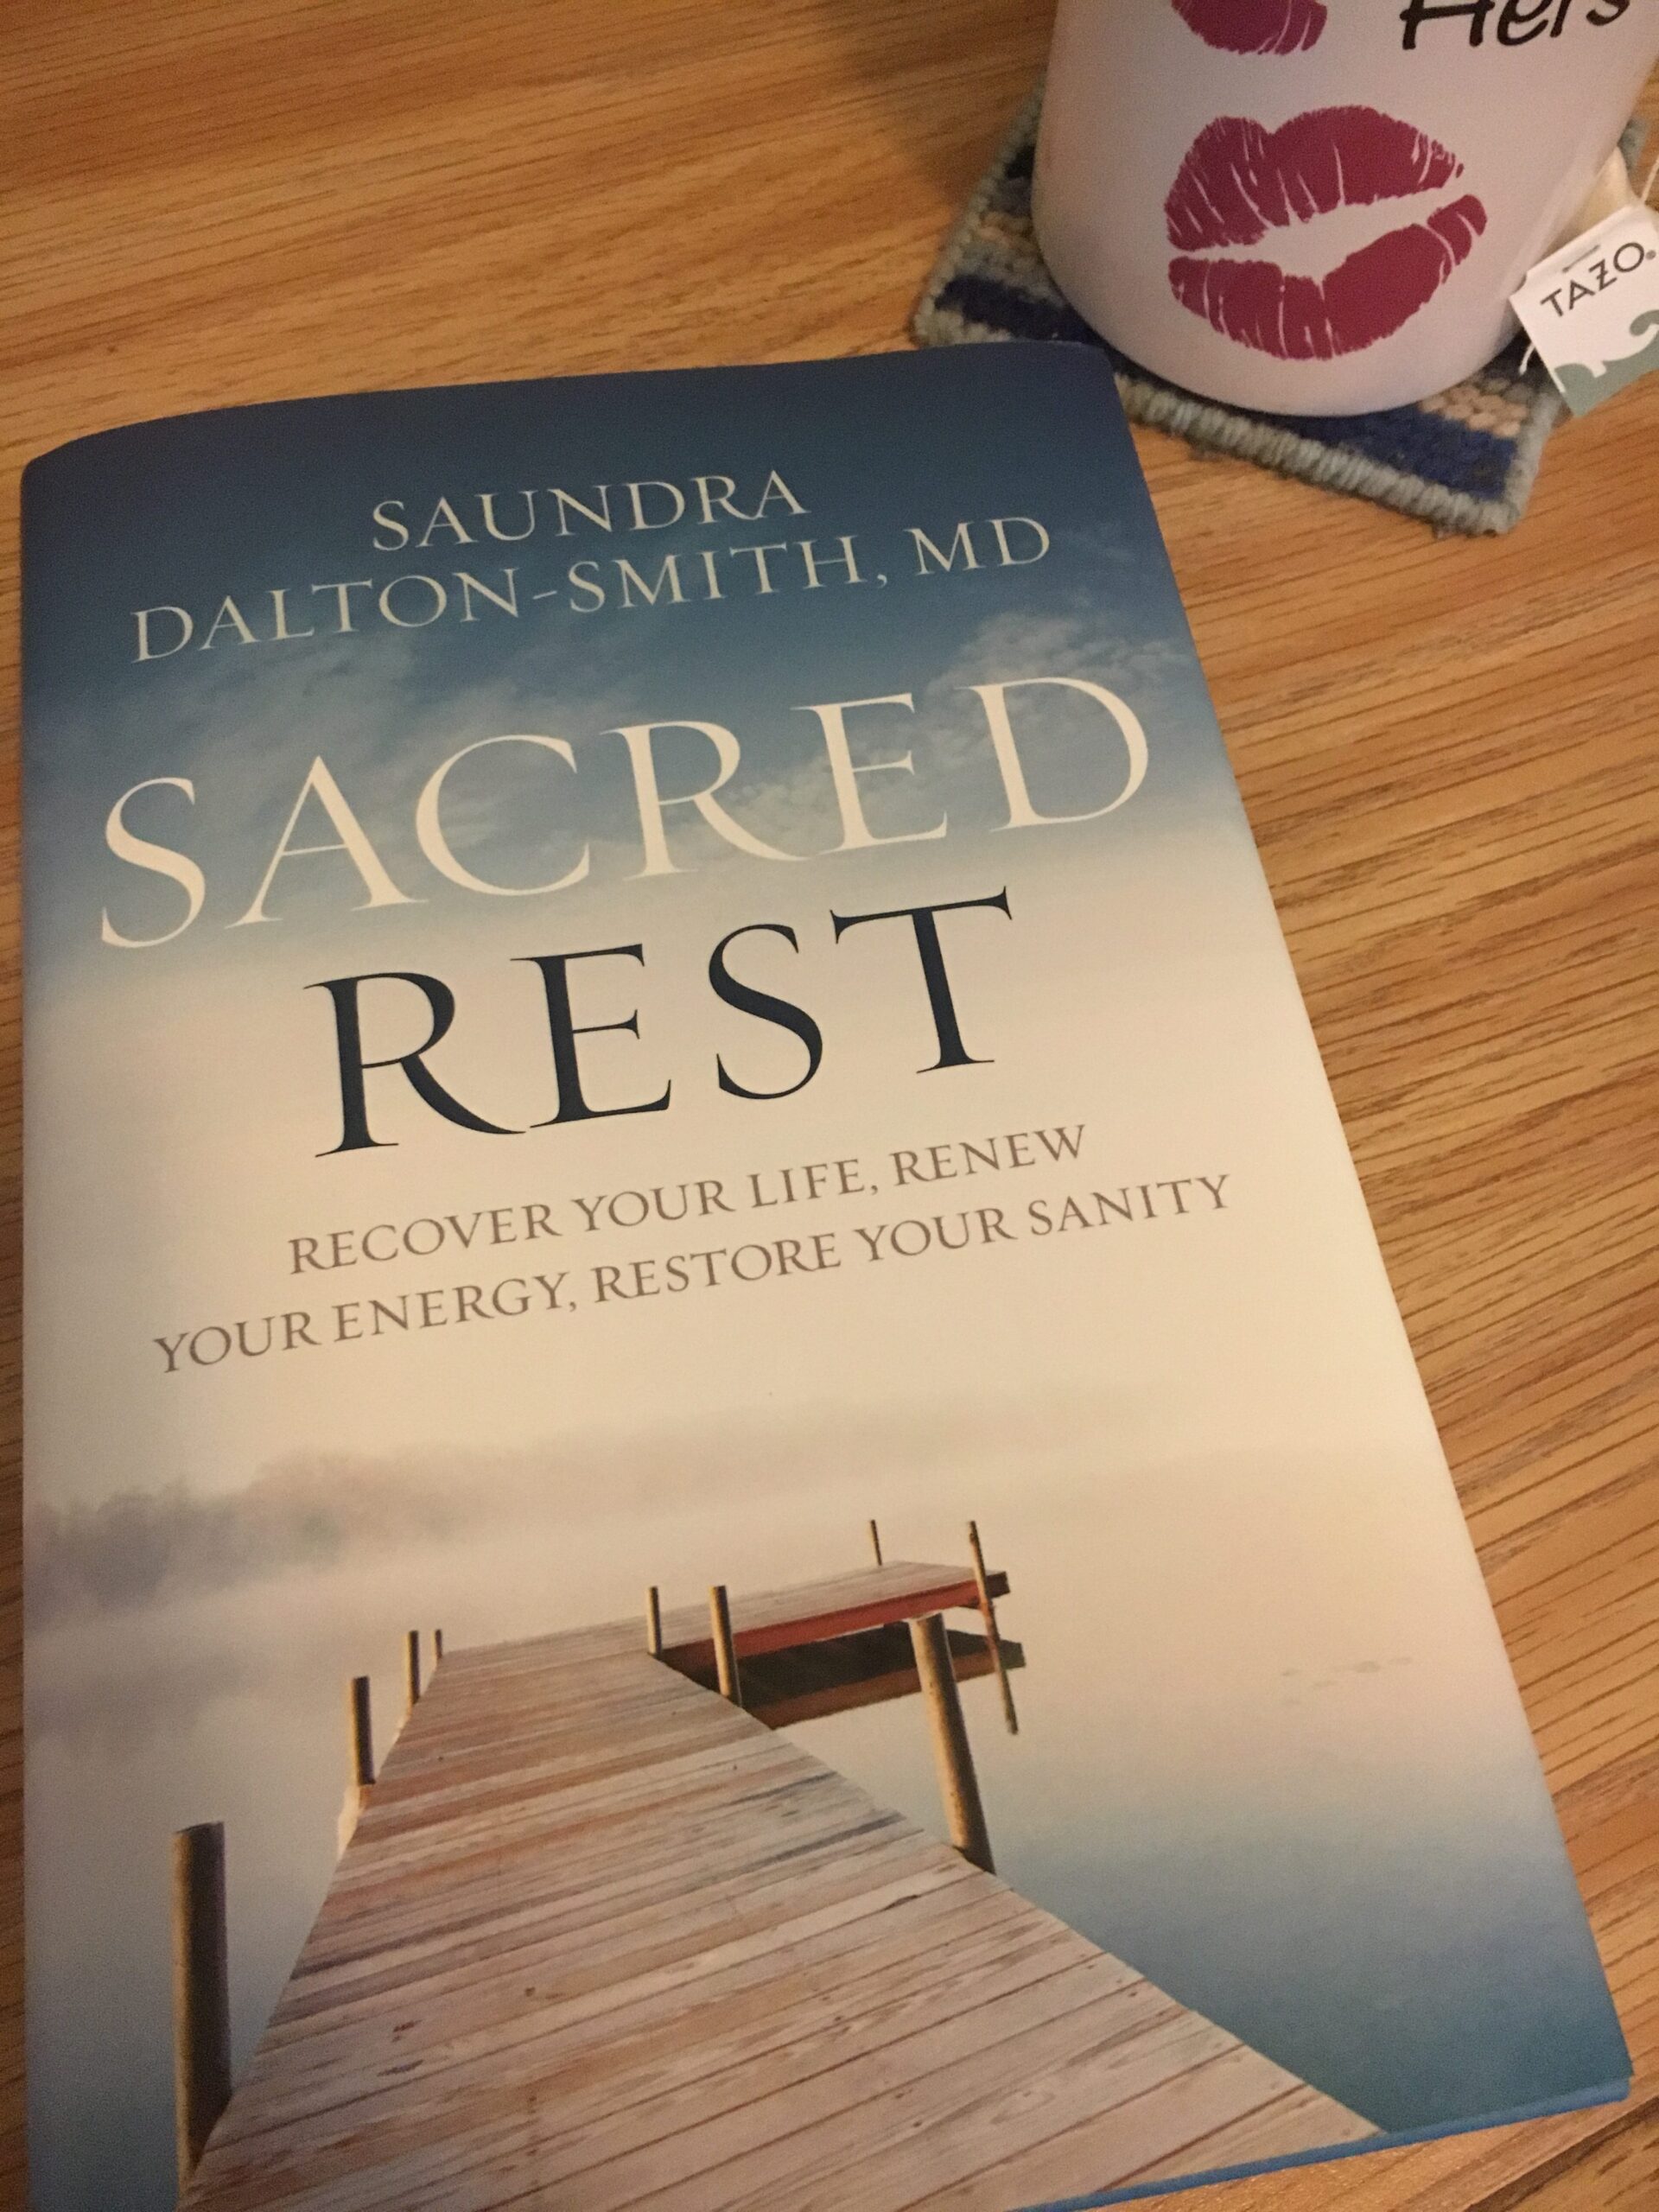 Sacred Rest by Saundra Dalton-Smith, MD book cover with a white mug - decorated with lip prints and the word "hers" - slightly visible in the top right corner and a tea bag with the brand "Tazo" dangling from it